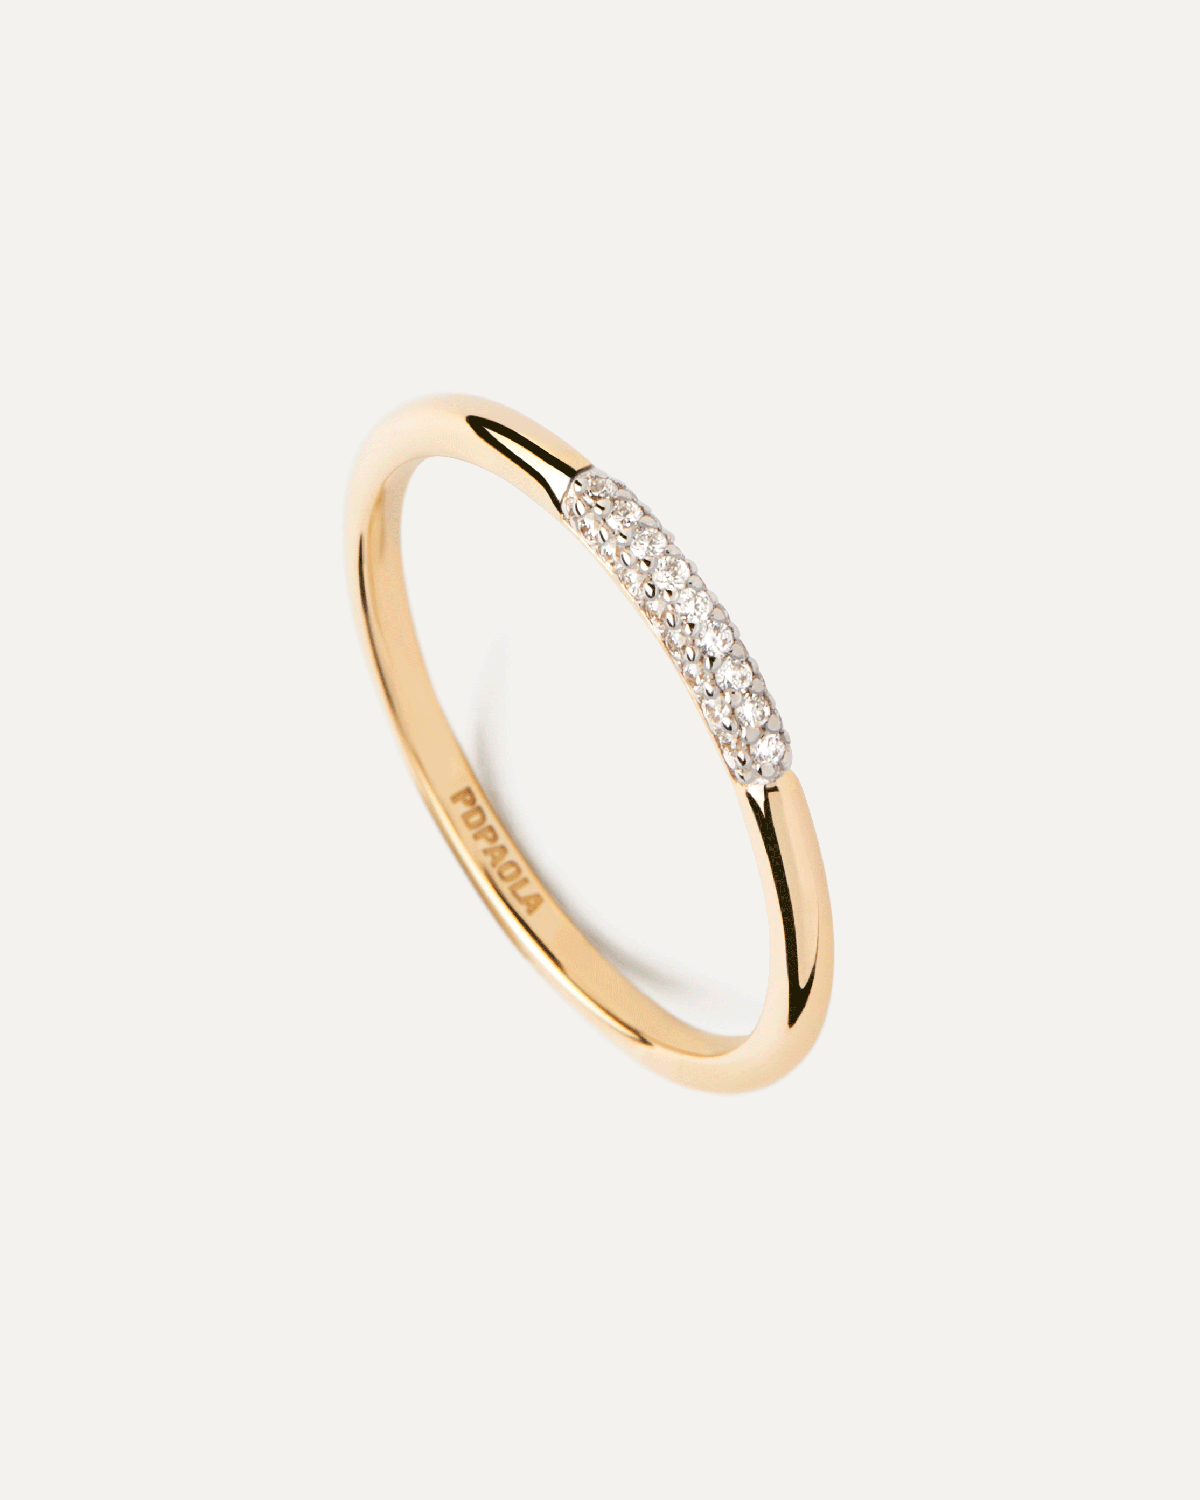 Diamonds and gold Nora ring. Dainty ring in solid yellow gold set with a row of pavé lab-grown diamonds at the top. Get the latest arrival from PDPAOLA. Place your order safely and get this Best Seller.